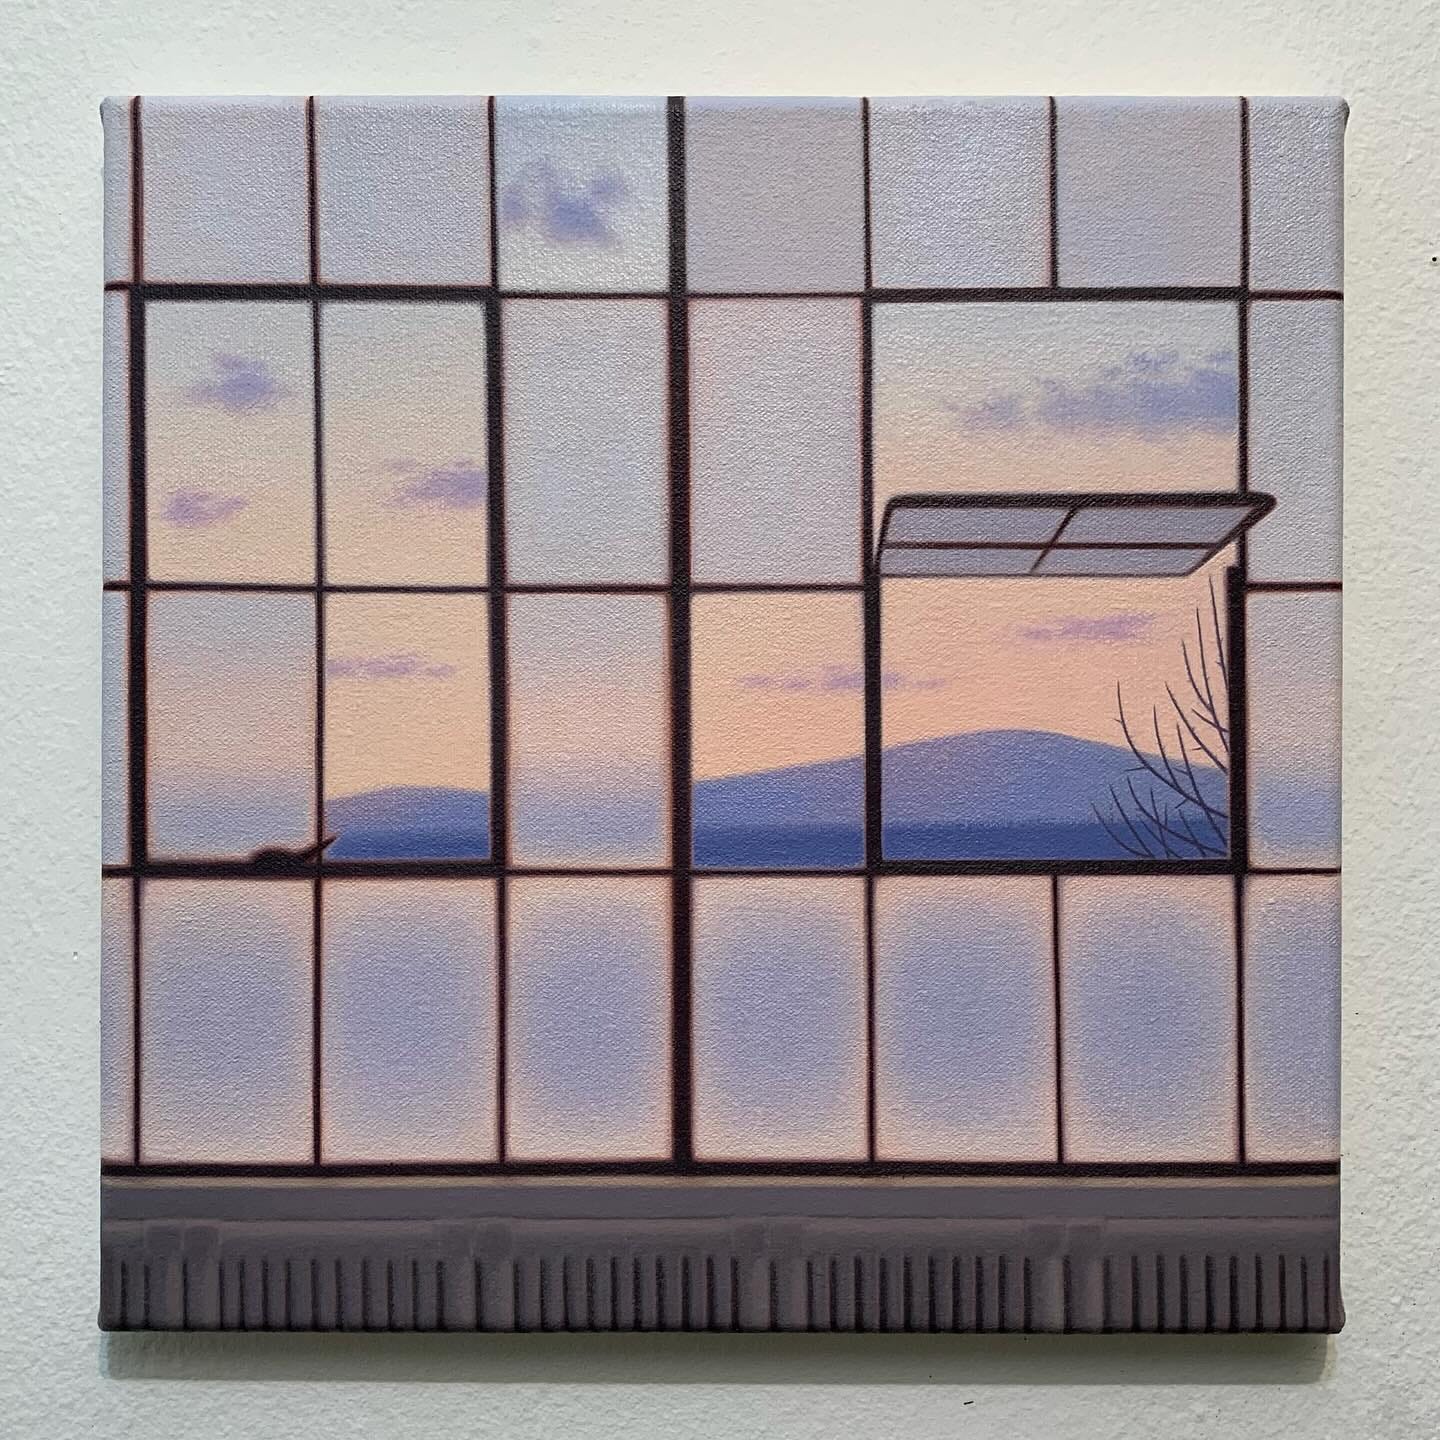 Painting by Andrew Gordon of a window looking out on mountains. Purples and whites dominate.